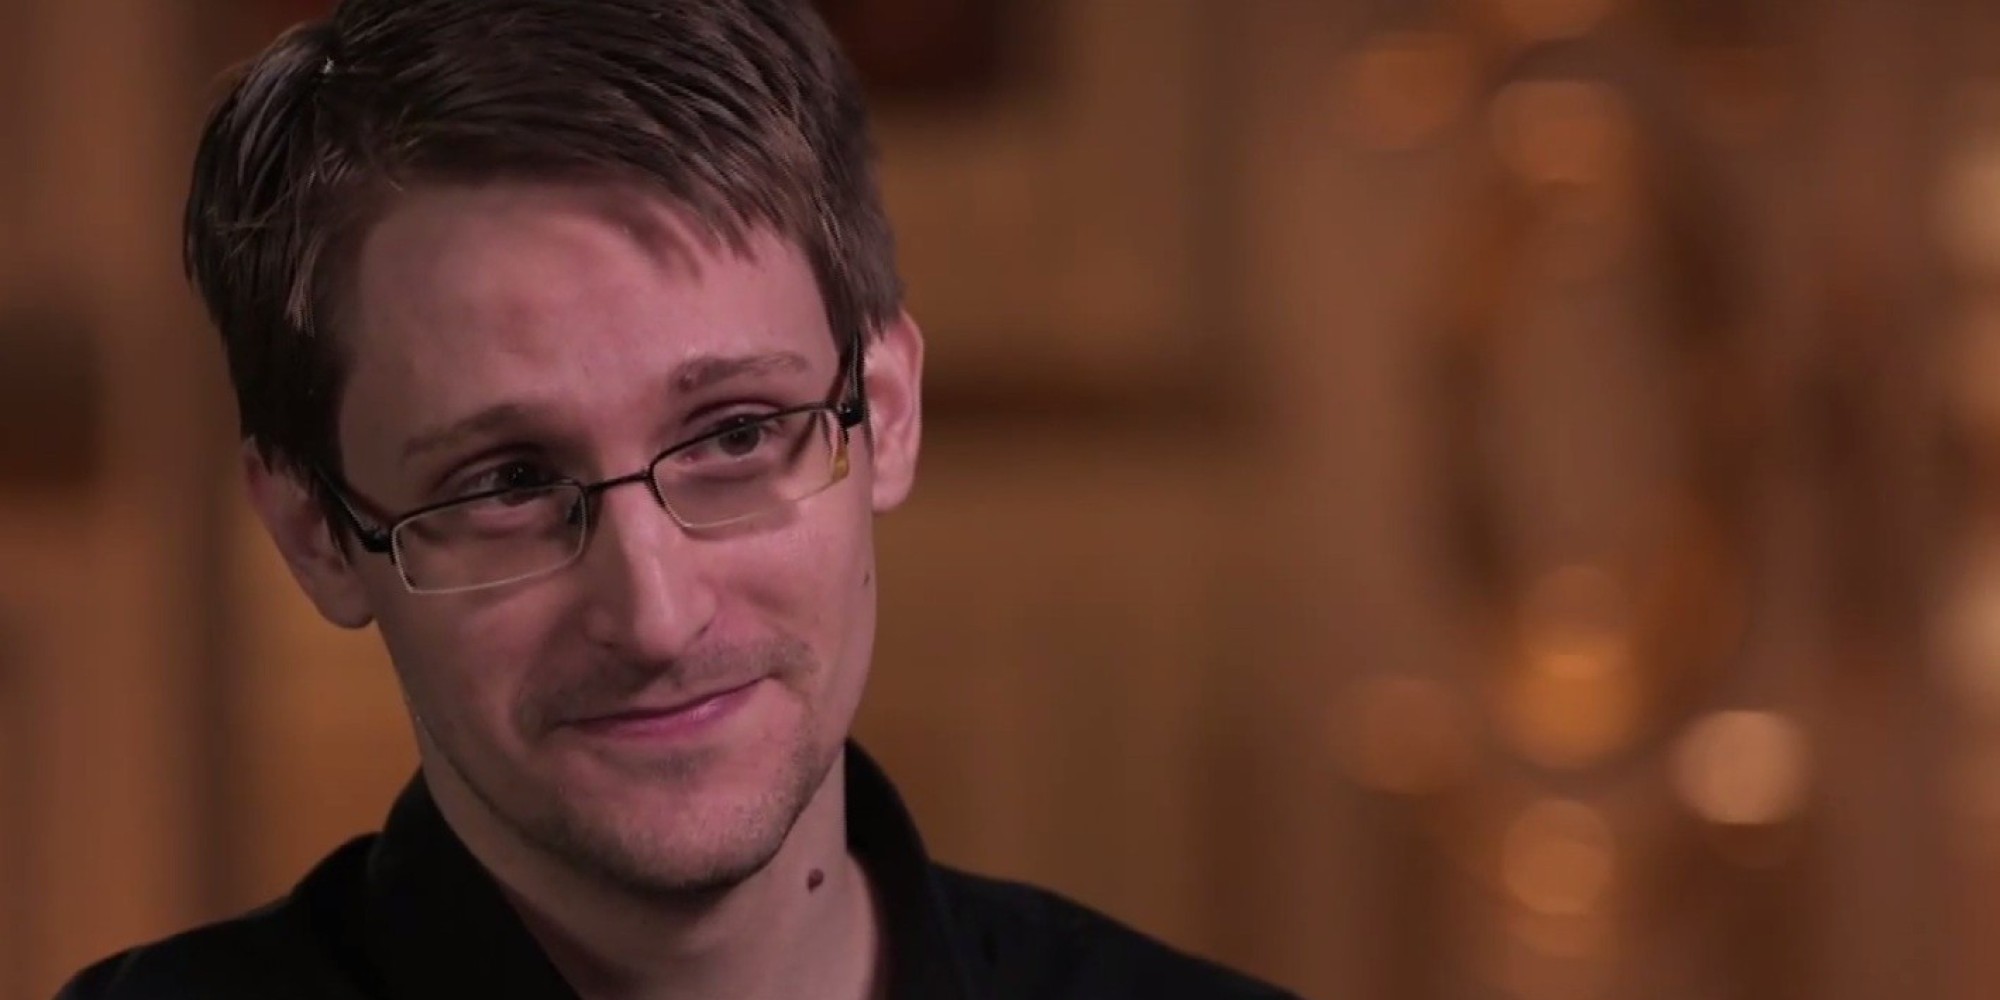 Edward Snowden Explains How The Government Can Get Your Dick Pic During Interview With John